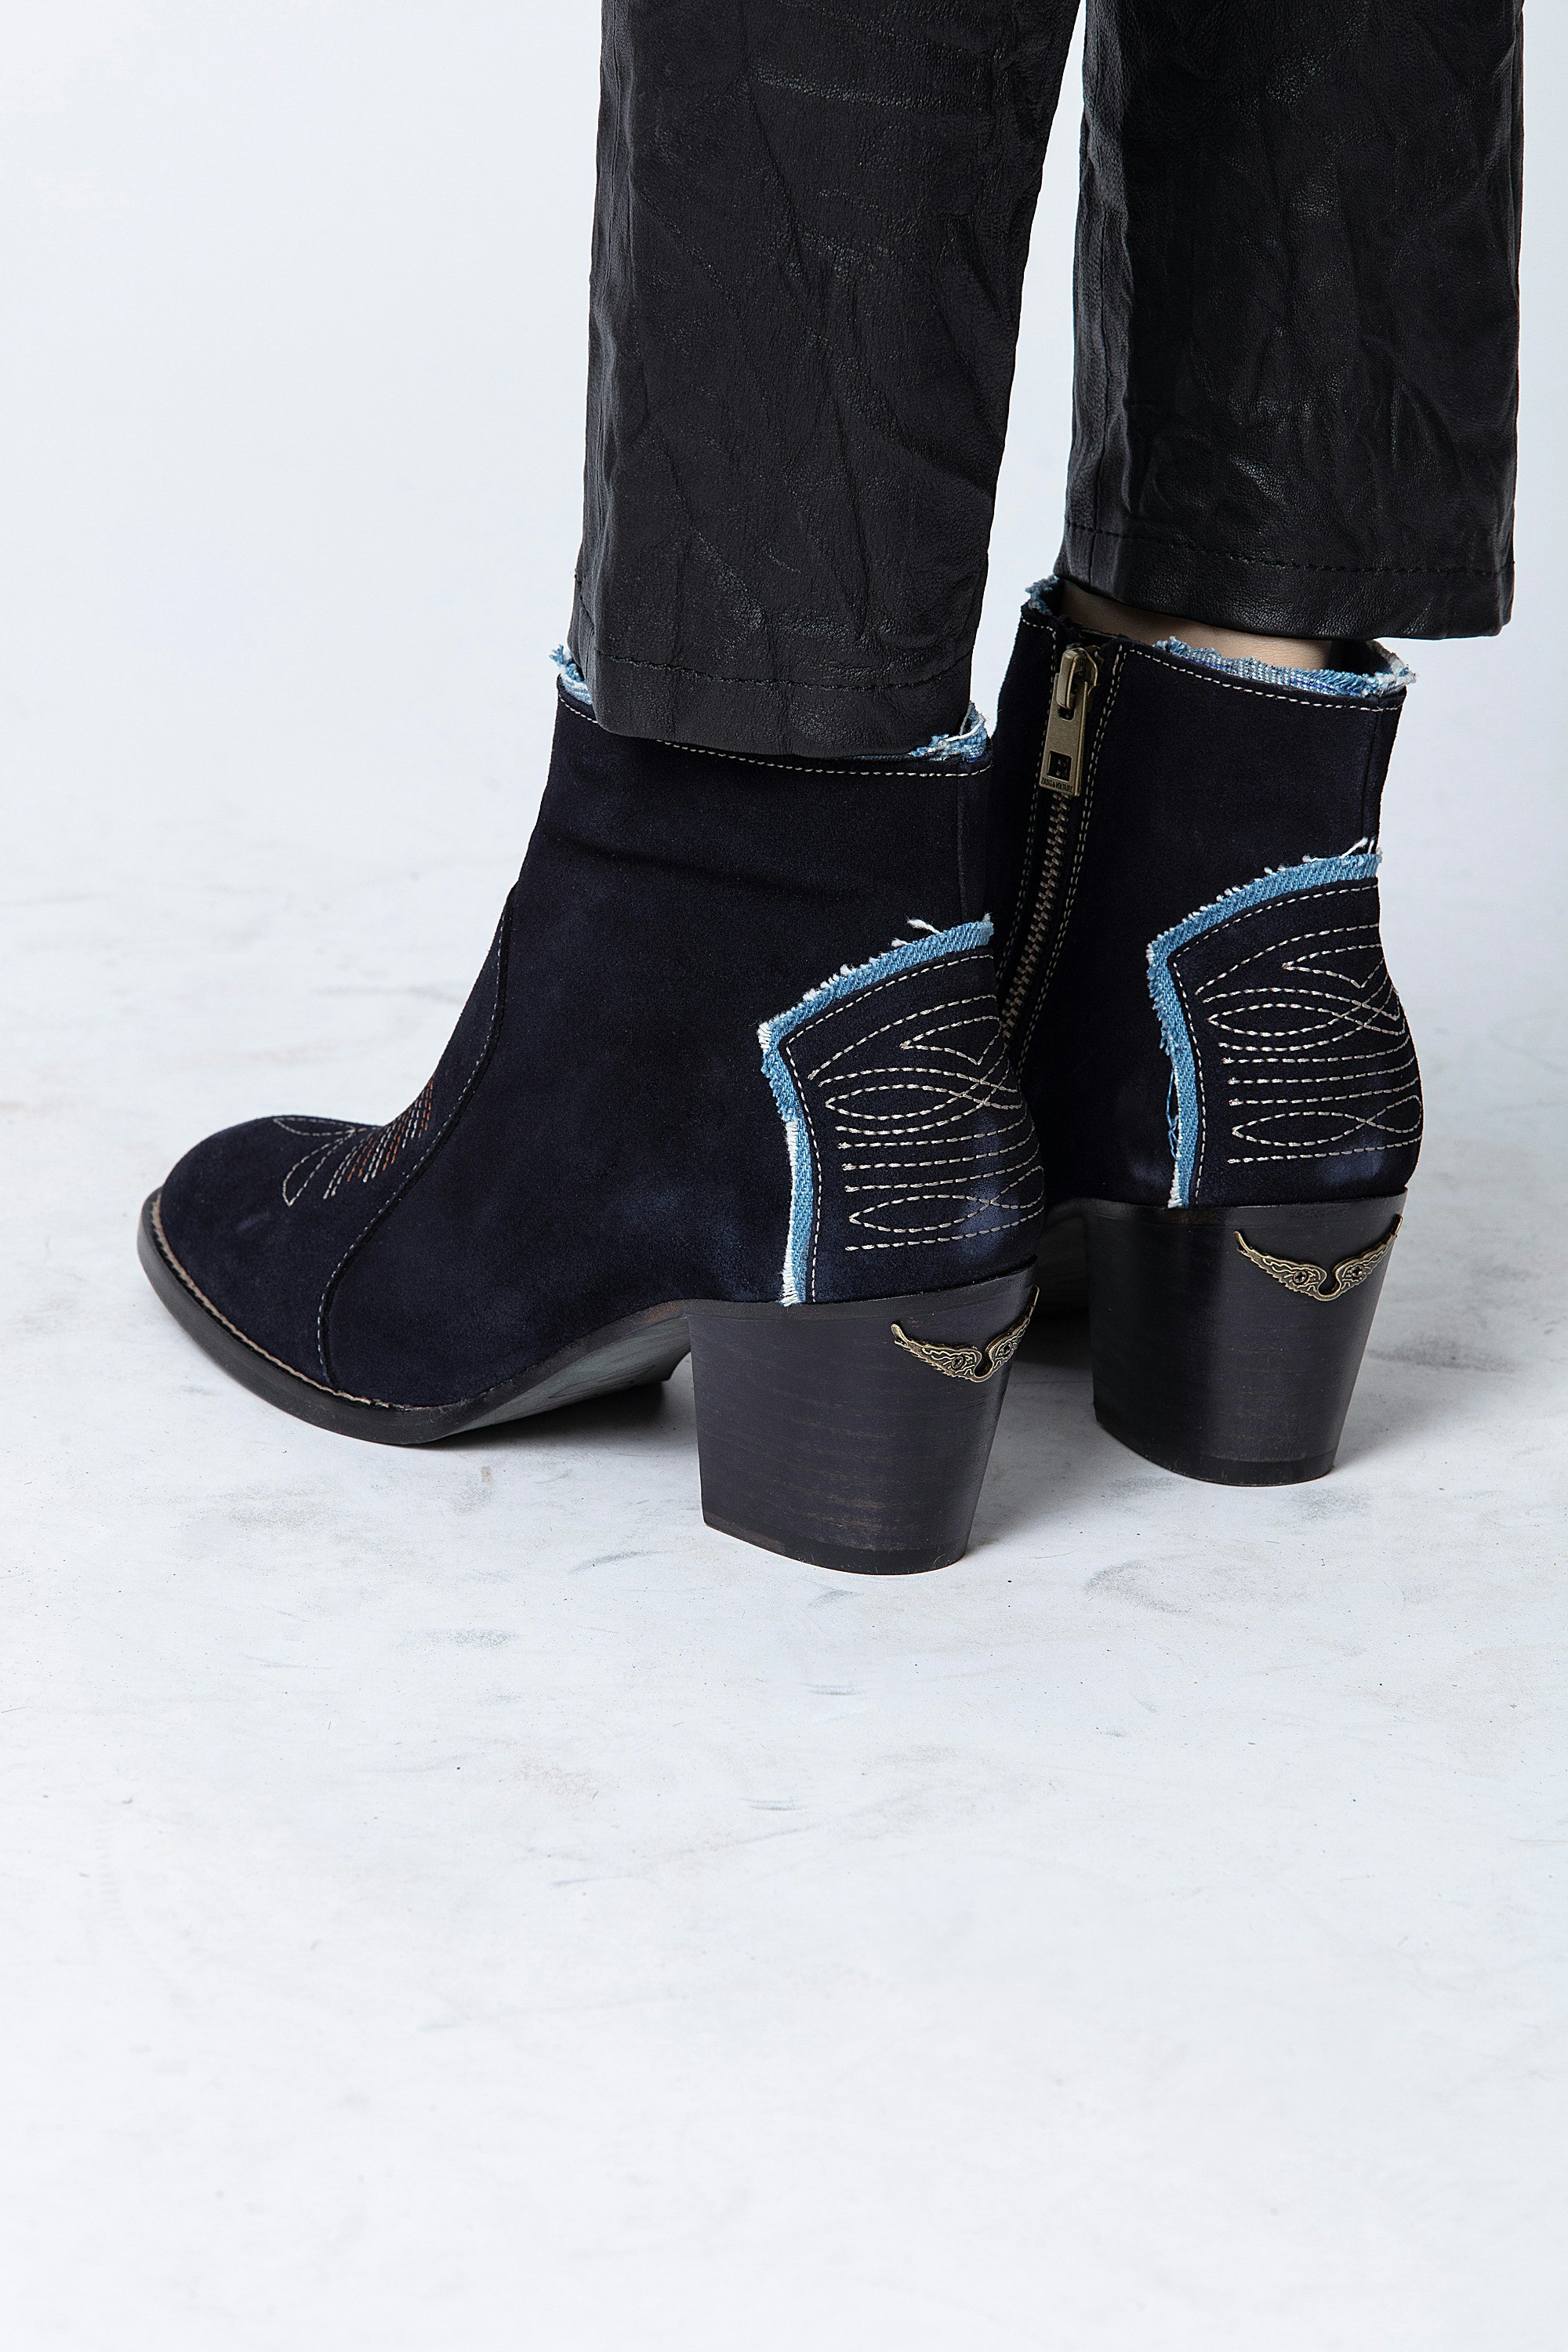 Molly Suede Denim Ankle Boots - boots 